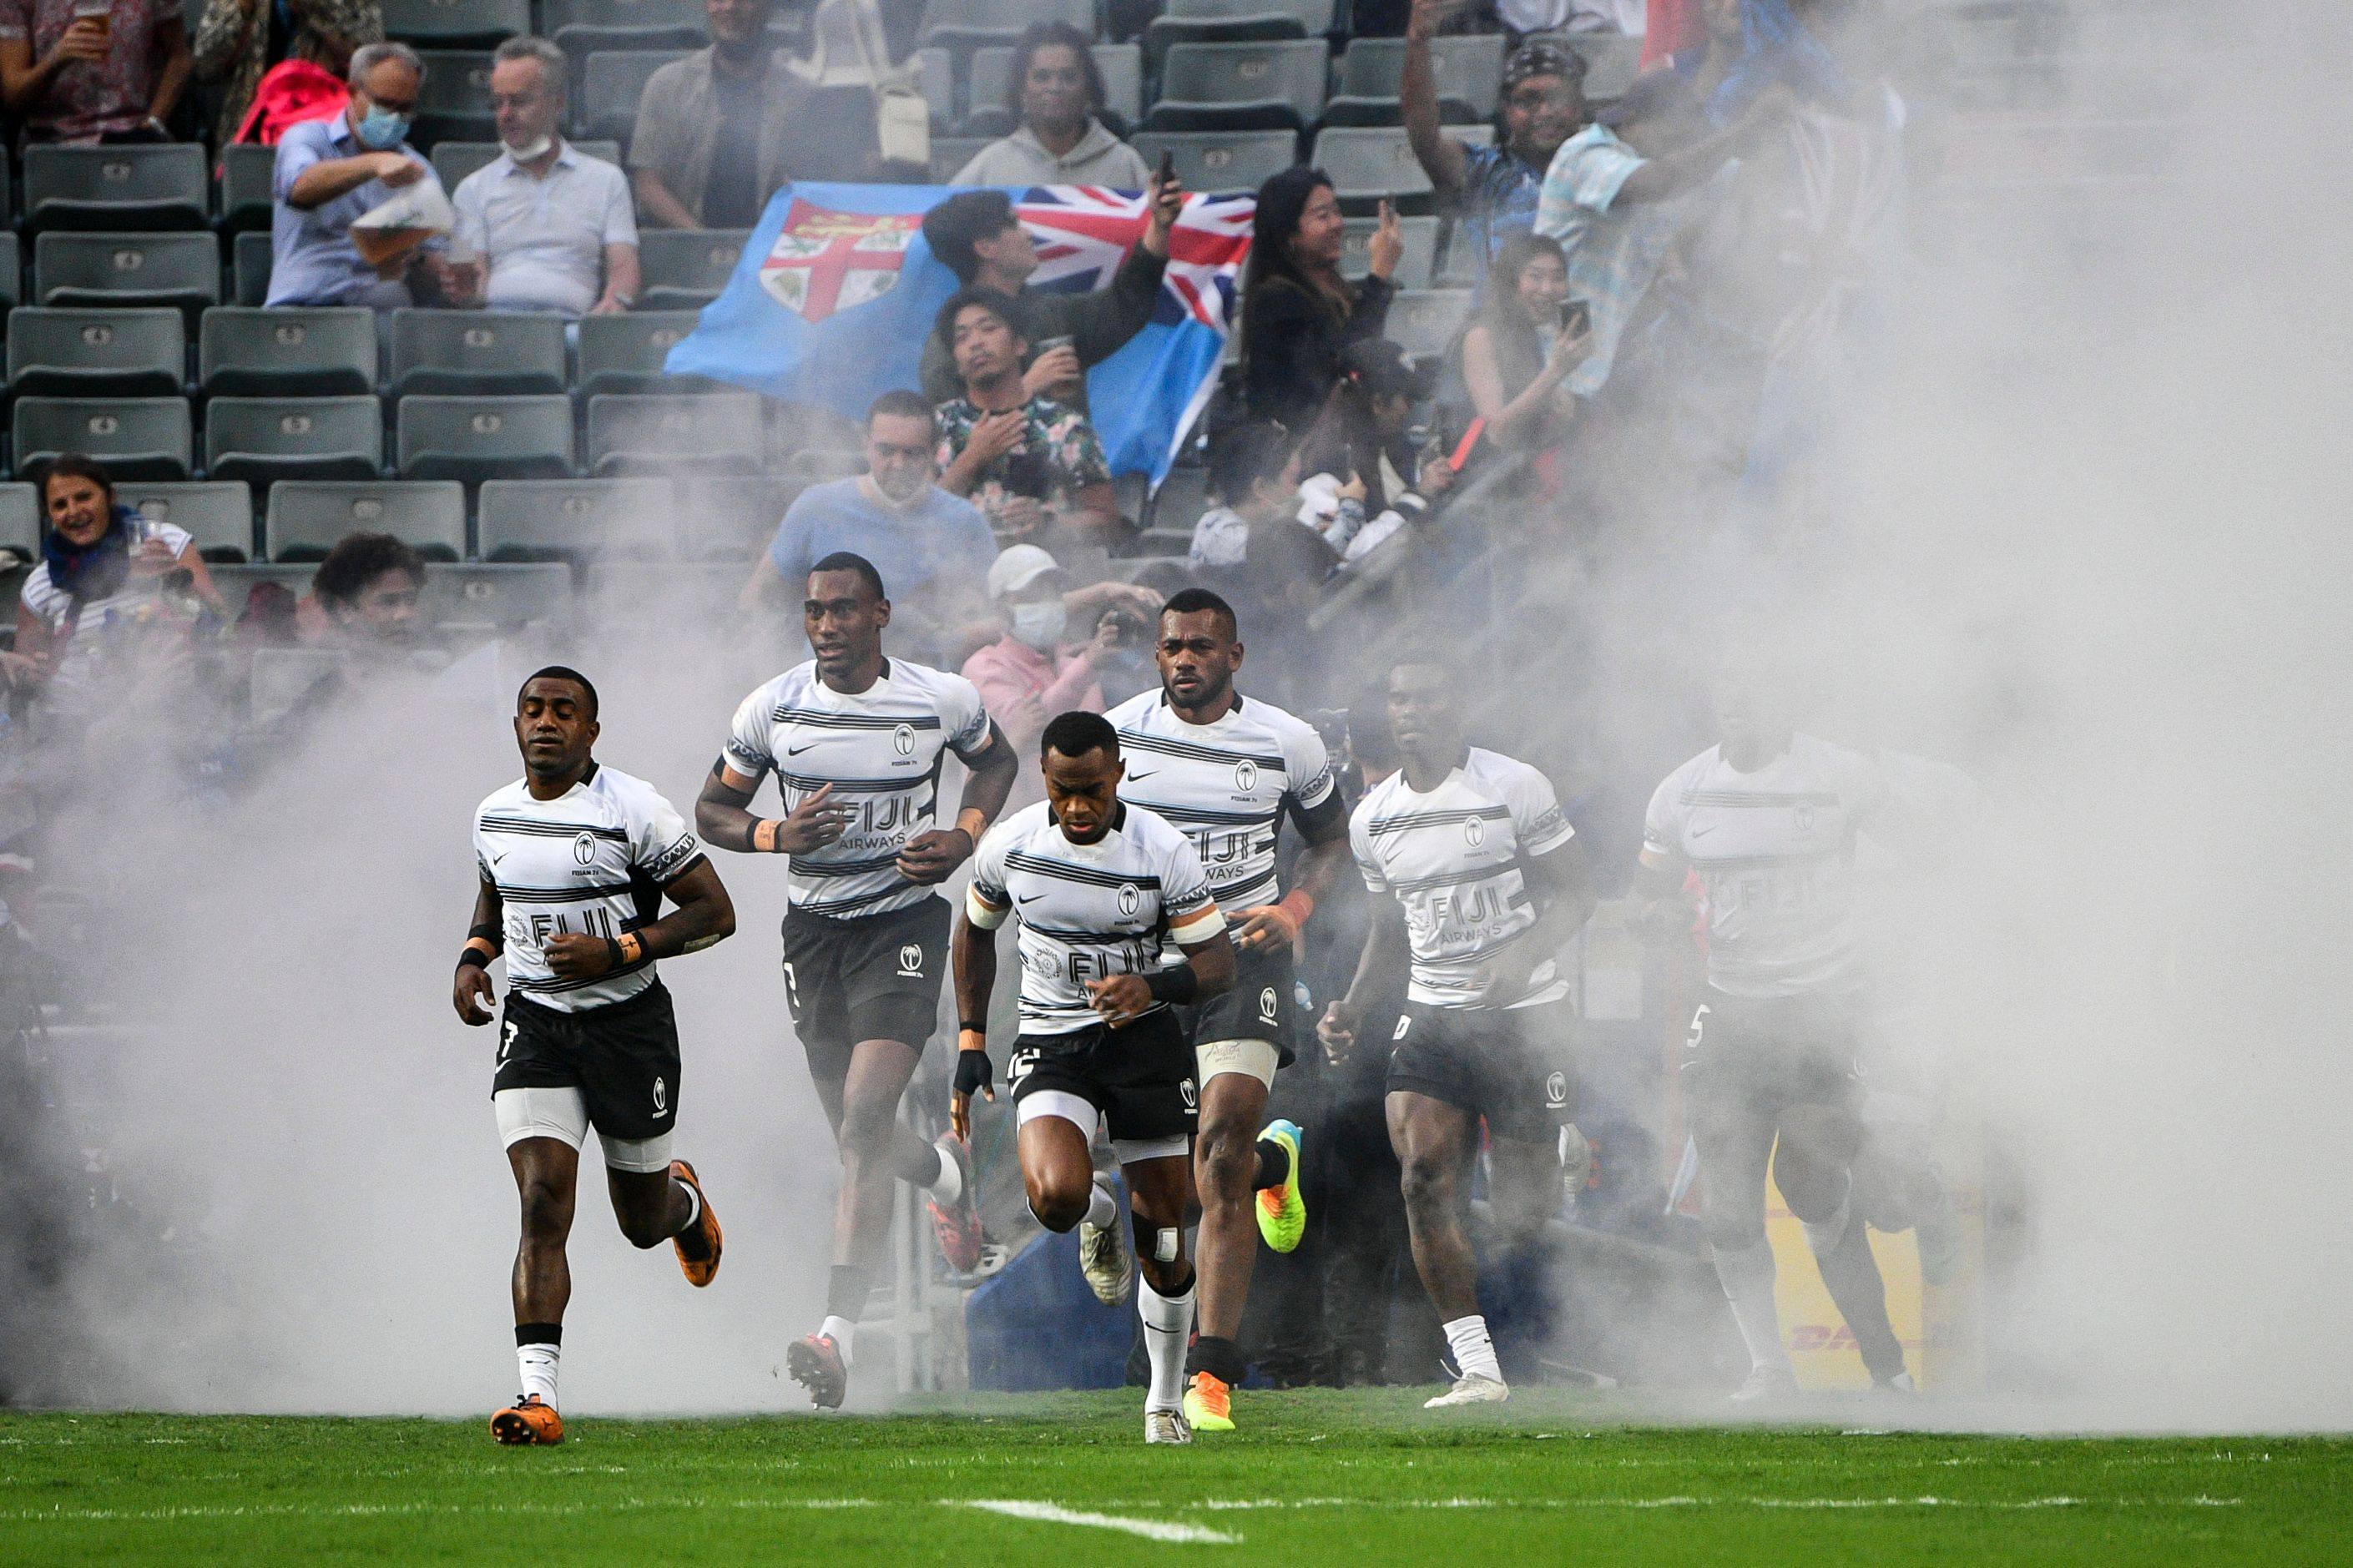 Fiji players run onto the field before playing Japan on the first day of the 2022 Hong Kong Sevens. Photo: AFP